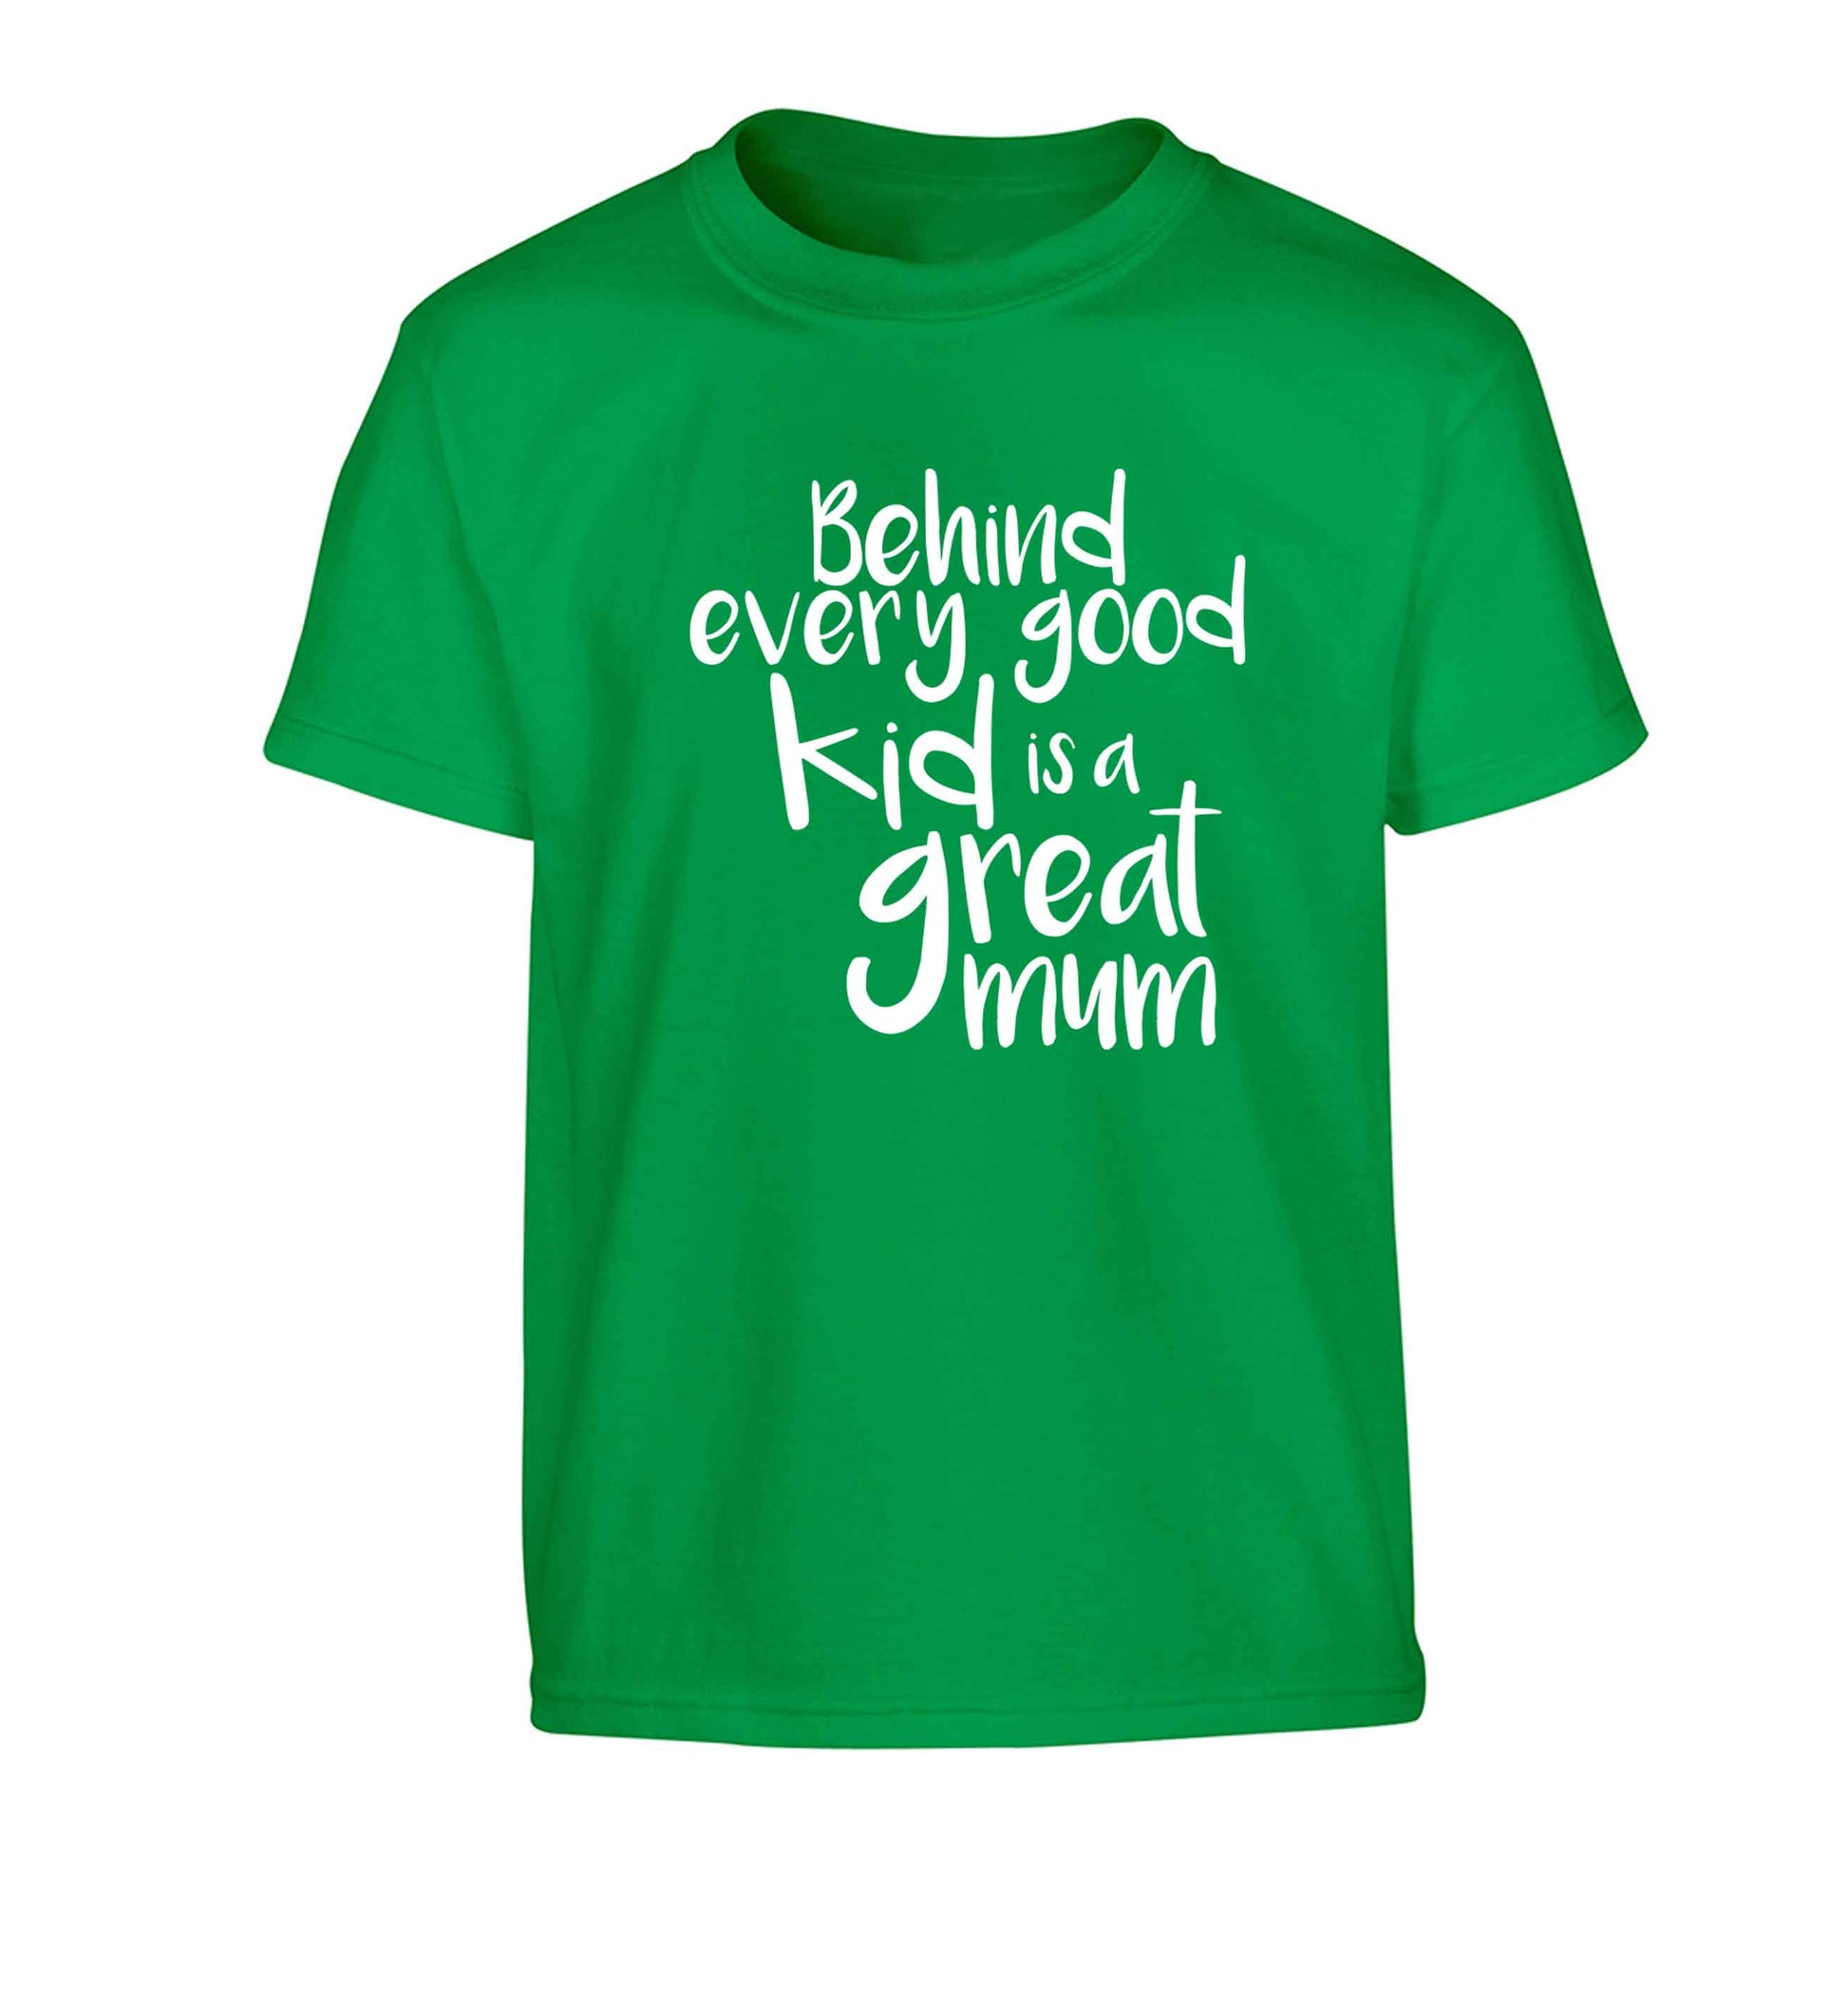 Behind every good kid is a great mum Children's green Tshirt 12-13 Years